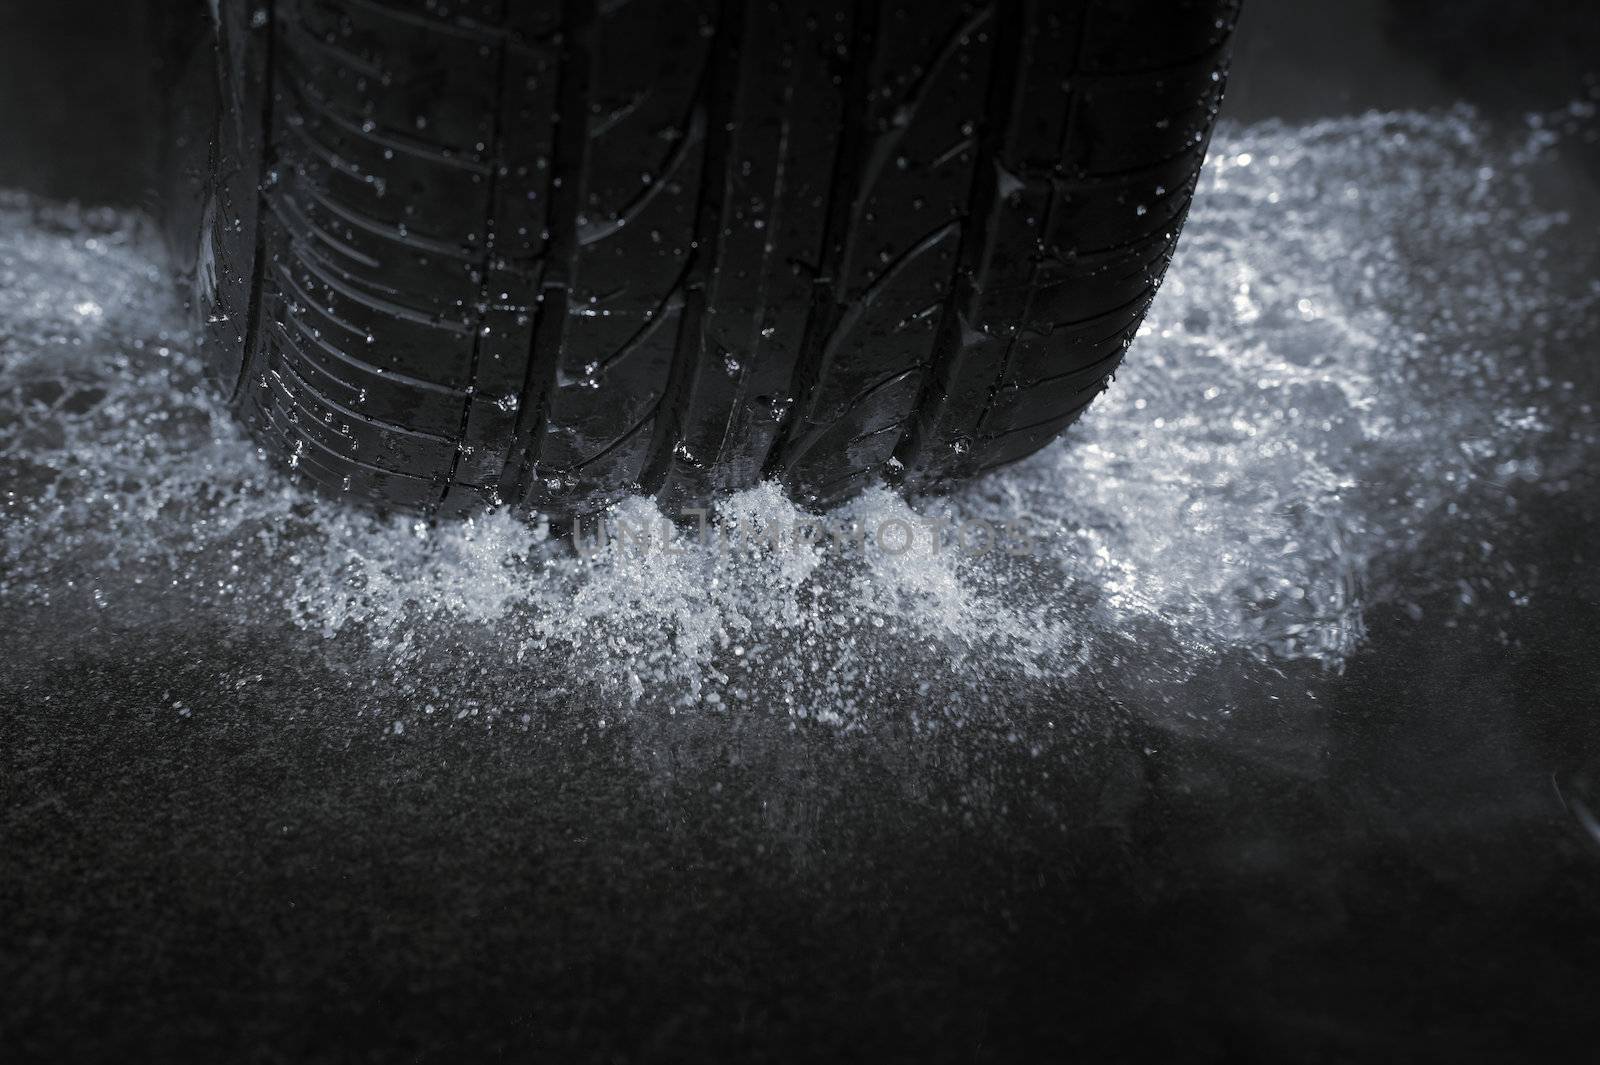 A Car tire on a wet road. The rain groove is a design element of the tread pattern specifically arranged to channel water away from the footprint.